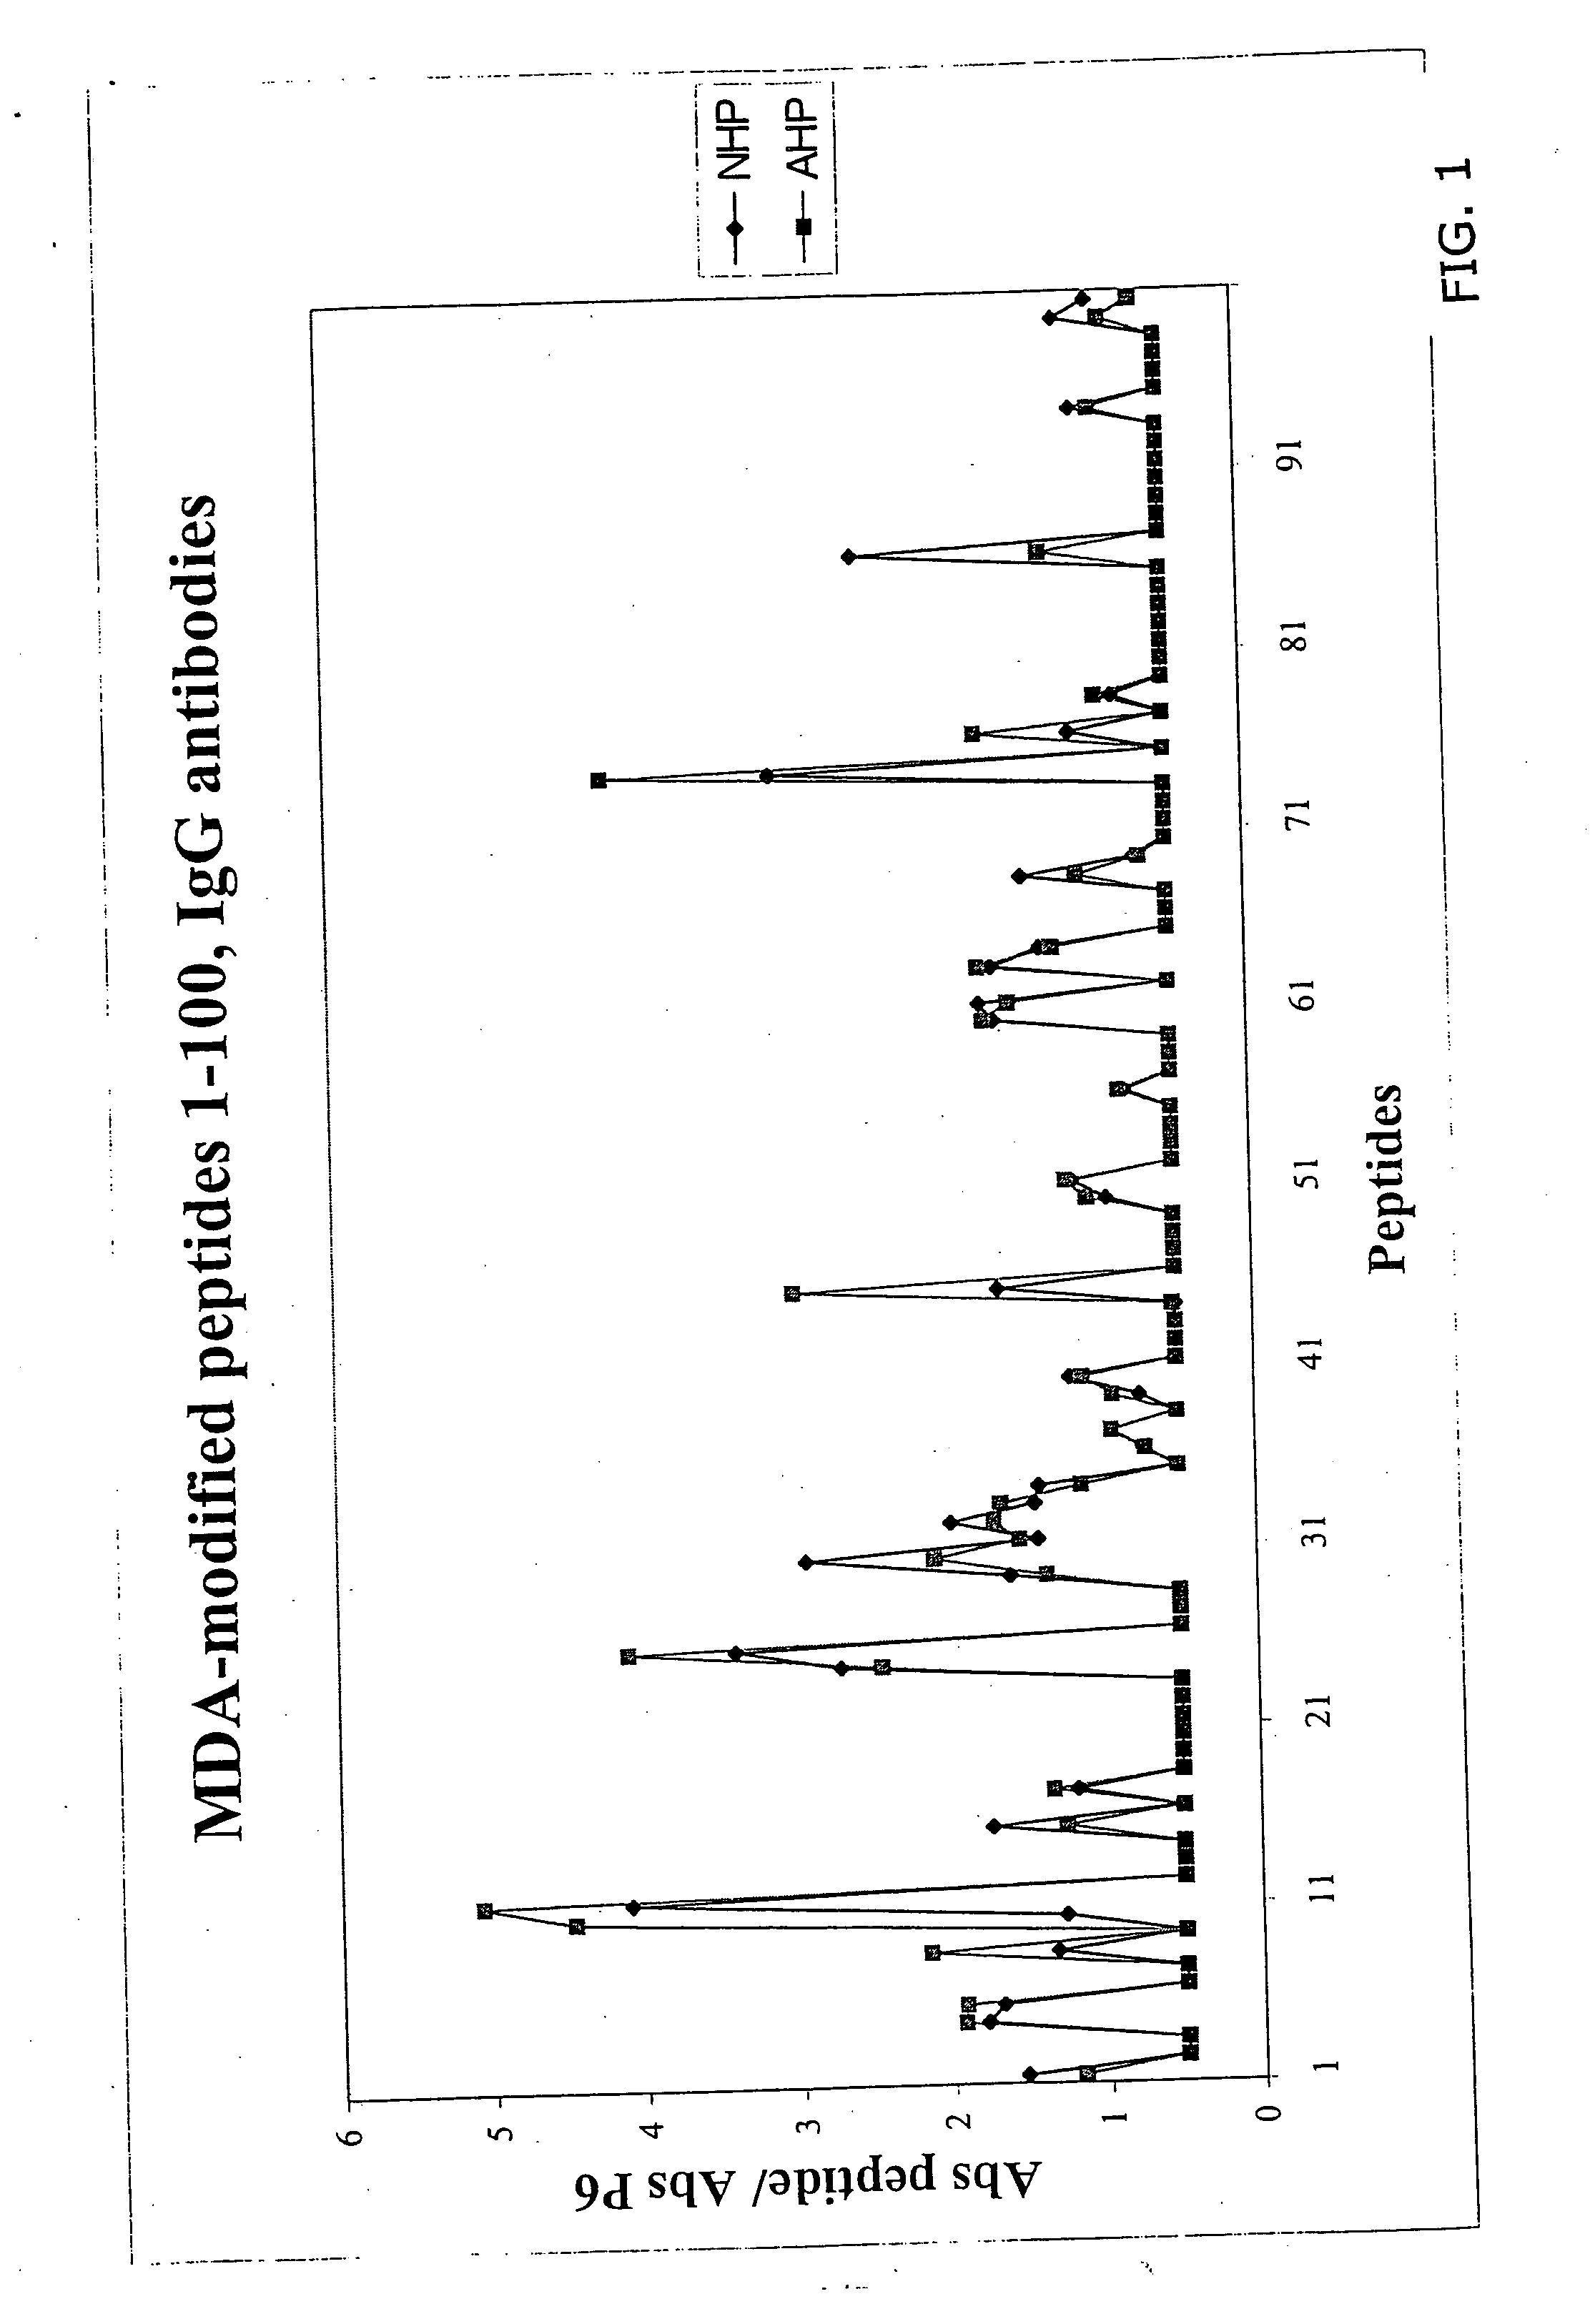 Peptide-based immunization therapy for treatment of atherosclerosis